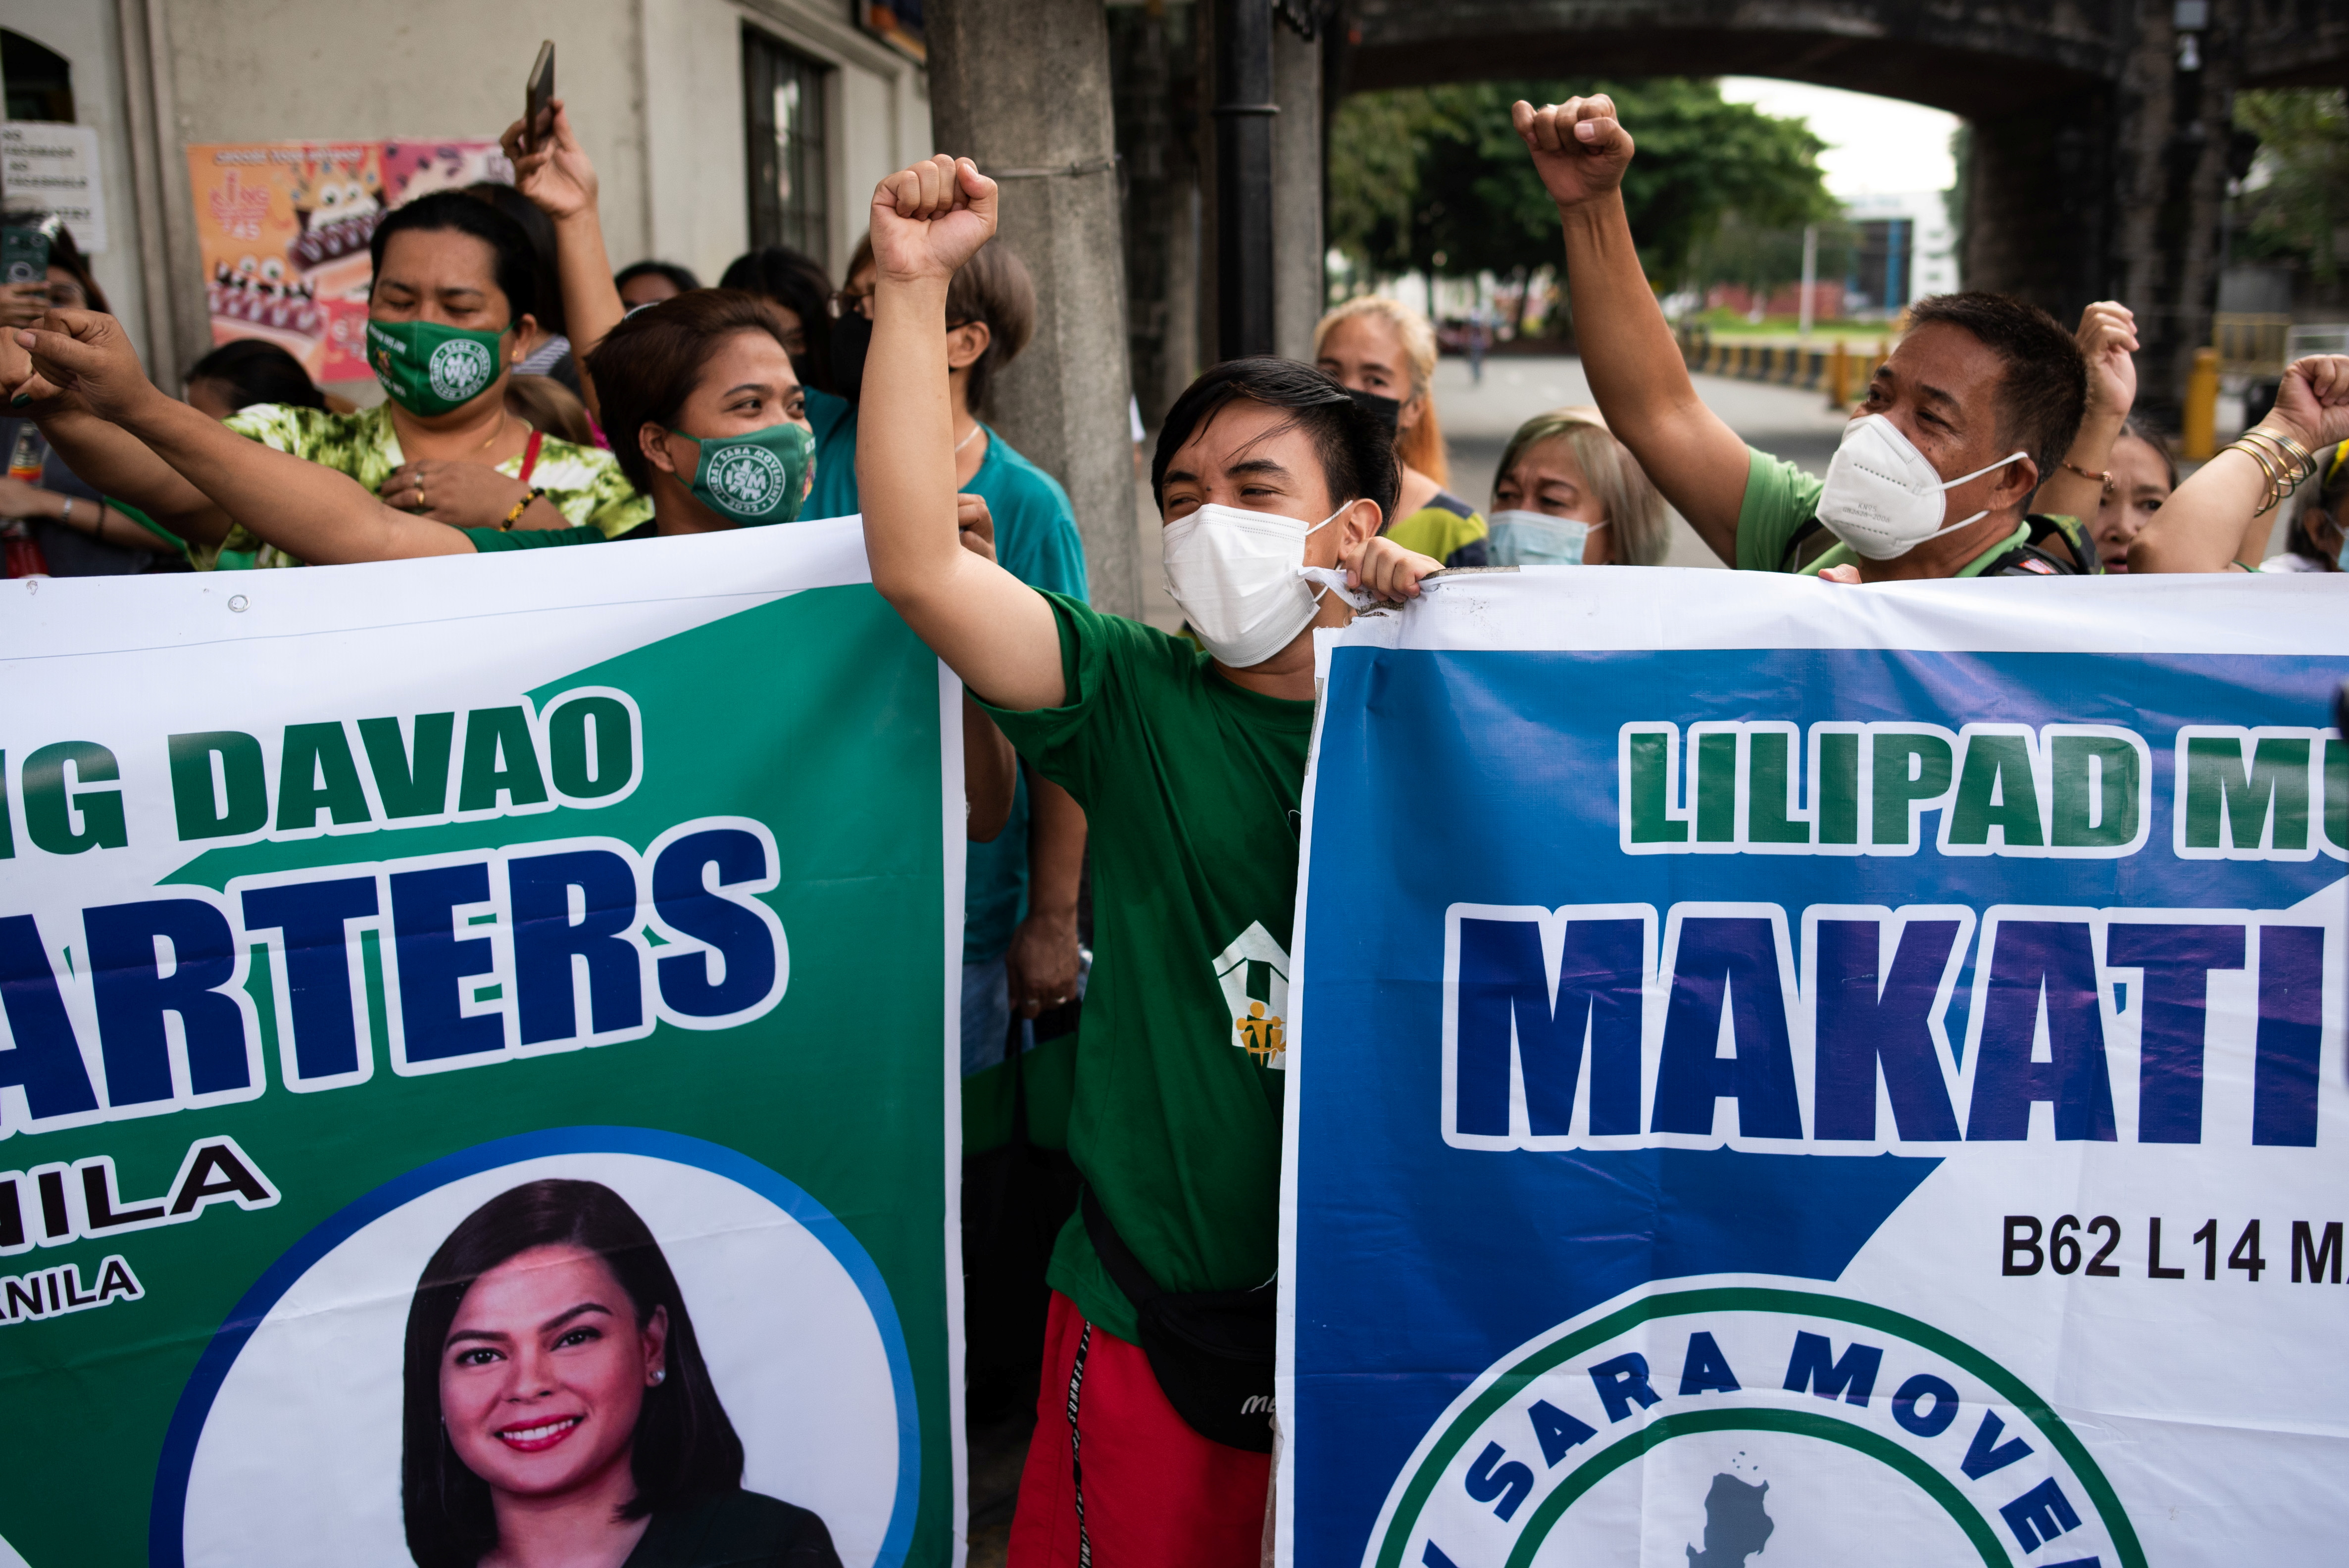 Supporters of Davao City Mayor Sara Duterte gather outside the Commission on Elections, after representatives filed her certificate of candidacy for vice president for the 2022 national election, in Manila, Philippines, November 13, 2021. REUTERS/Lisa Marie David